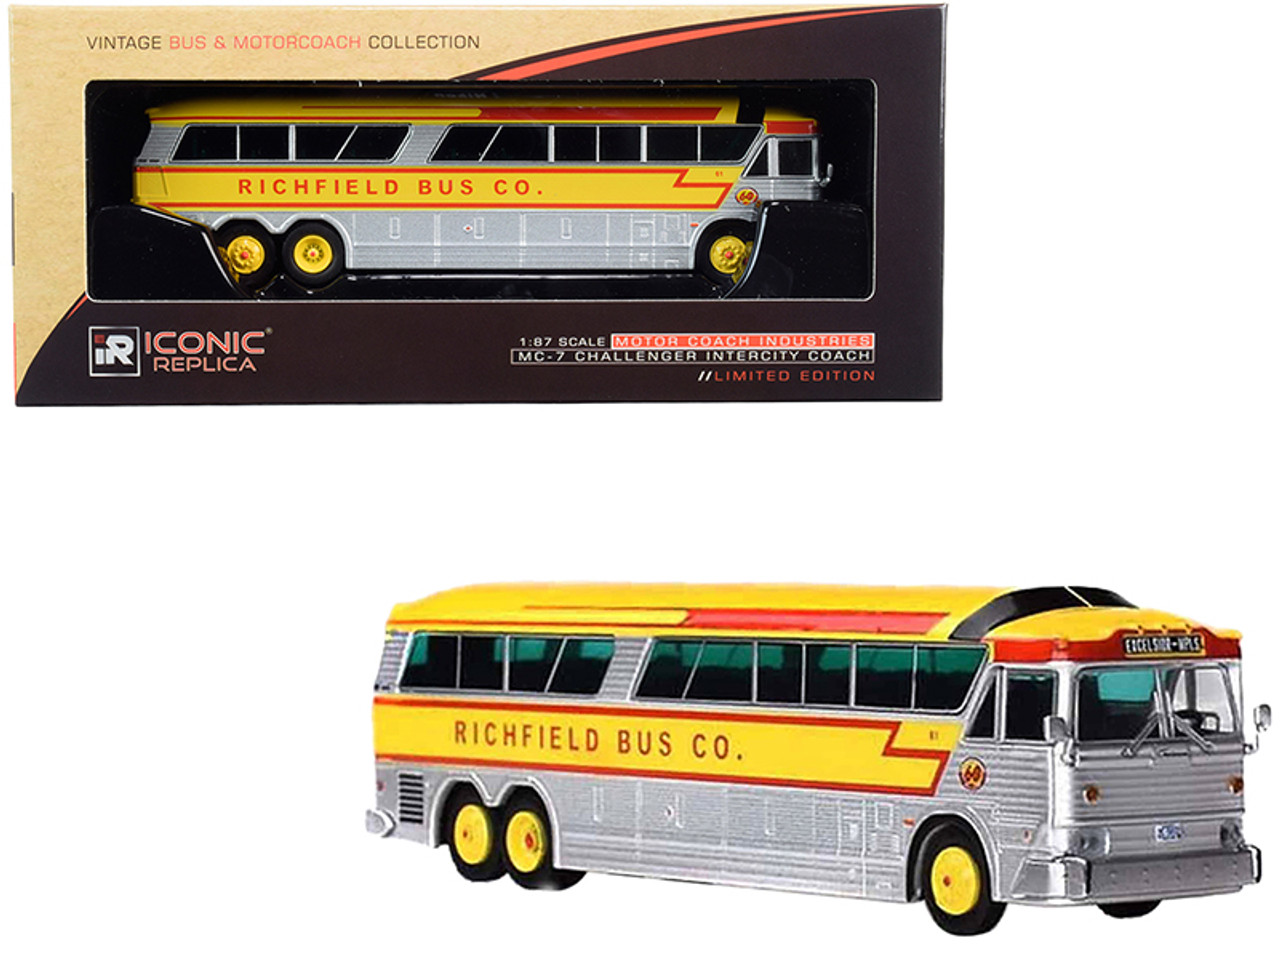 1970 MCI MC-7 Challenger Intercity Motorcoach "Richfield Bus Co." "Excelsior - Minneapolis" (Minnesota, U.S.A.) Silver and Yellow "Vintage Bus & Motorcoach Collection" 1/87 (HO) Diecast Model by Iconic Replicas